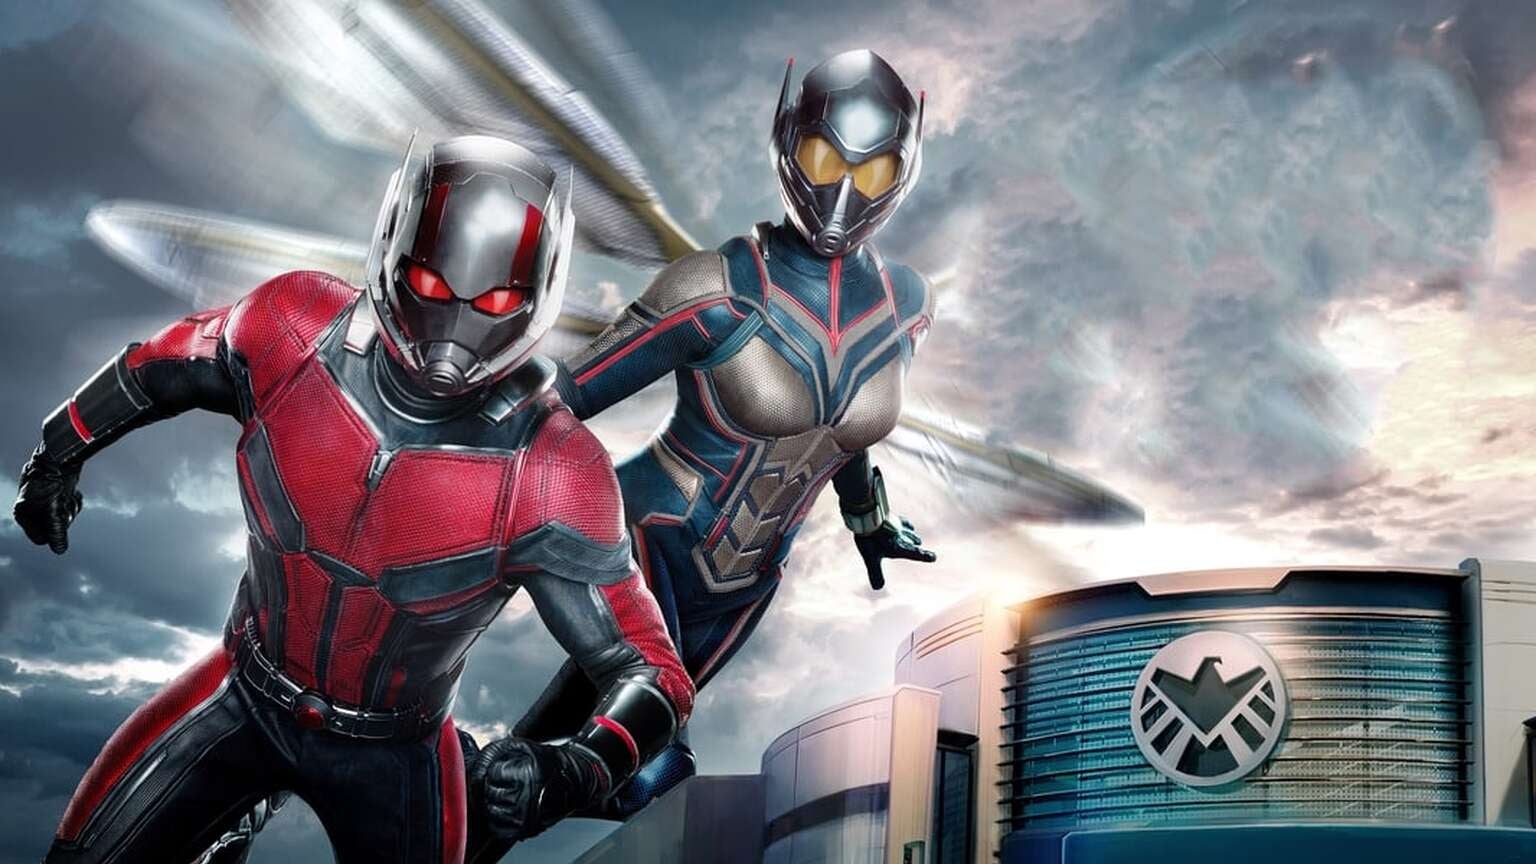 When will Ant-Man: Quantumania be available to stream on Disney Plus?